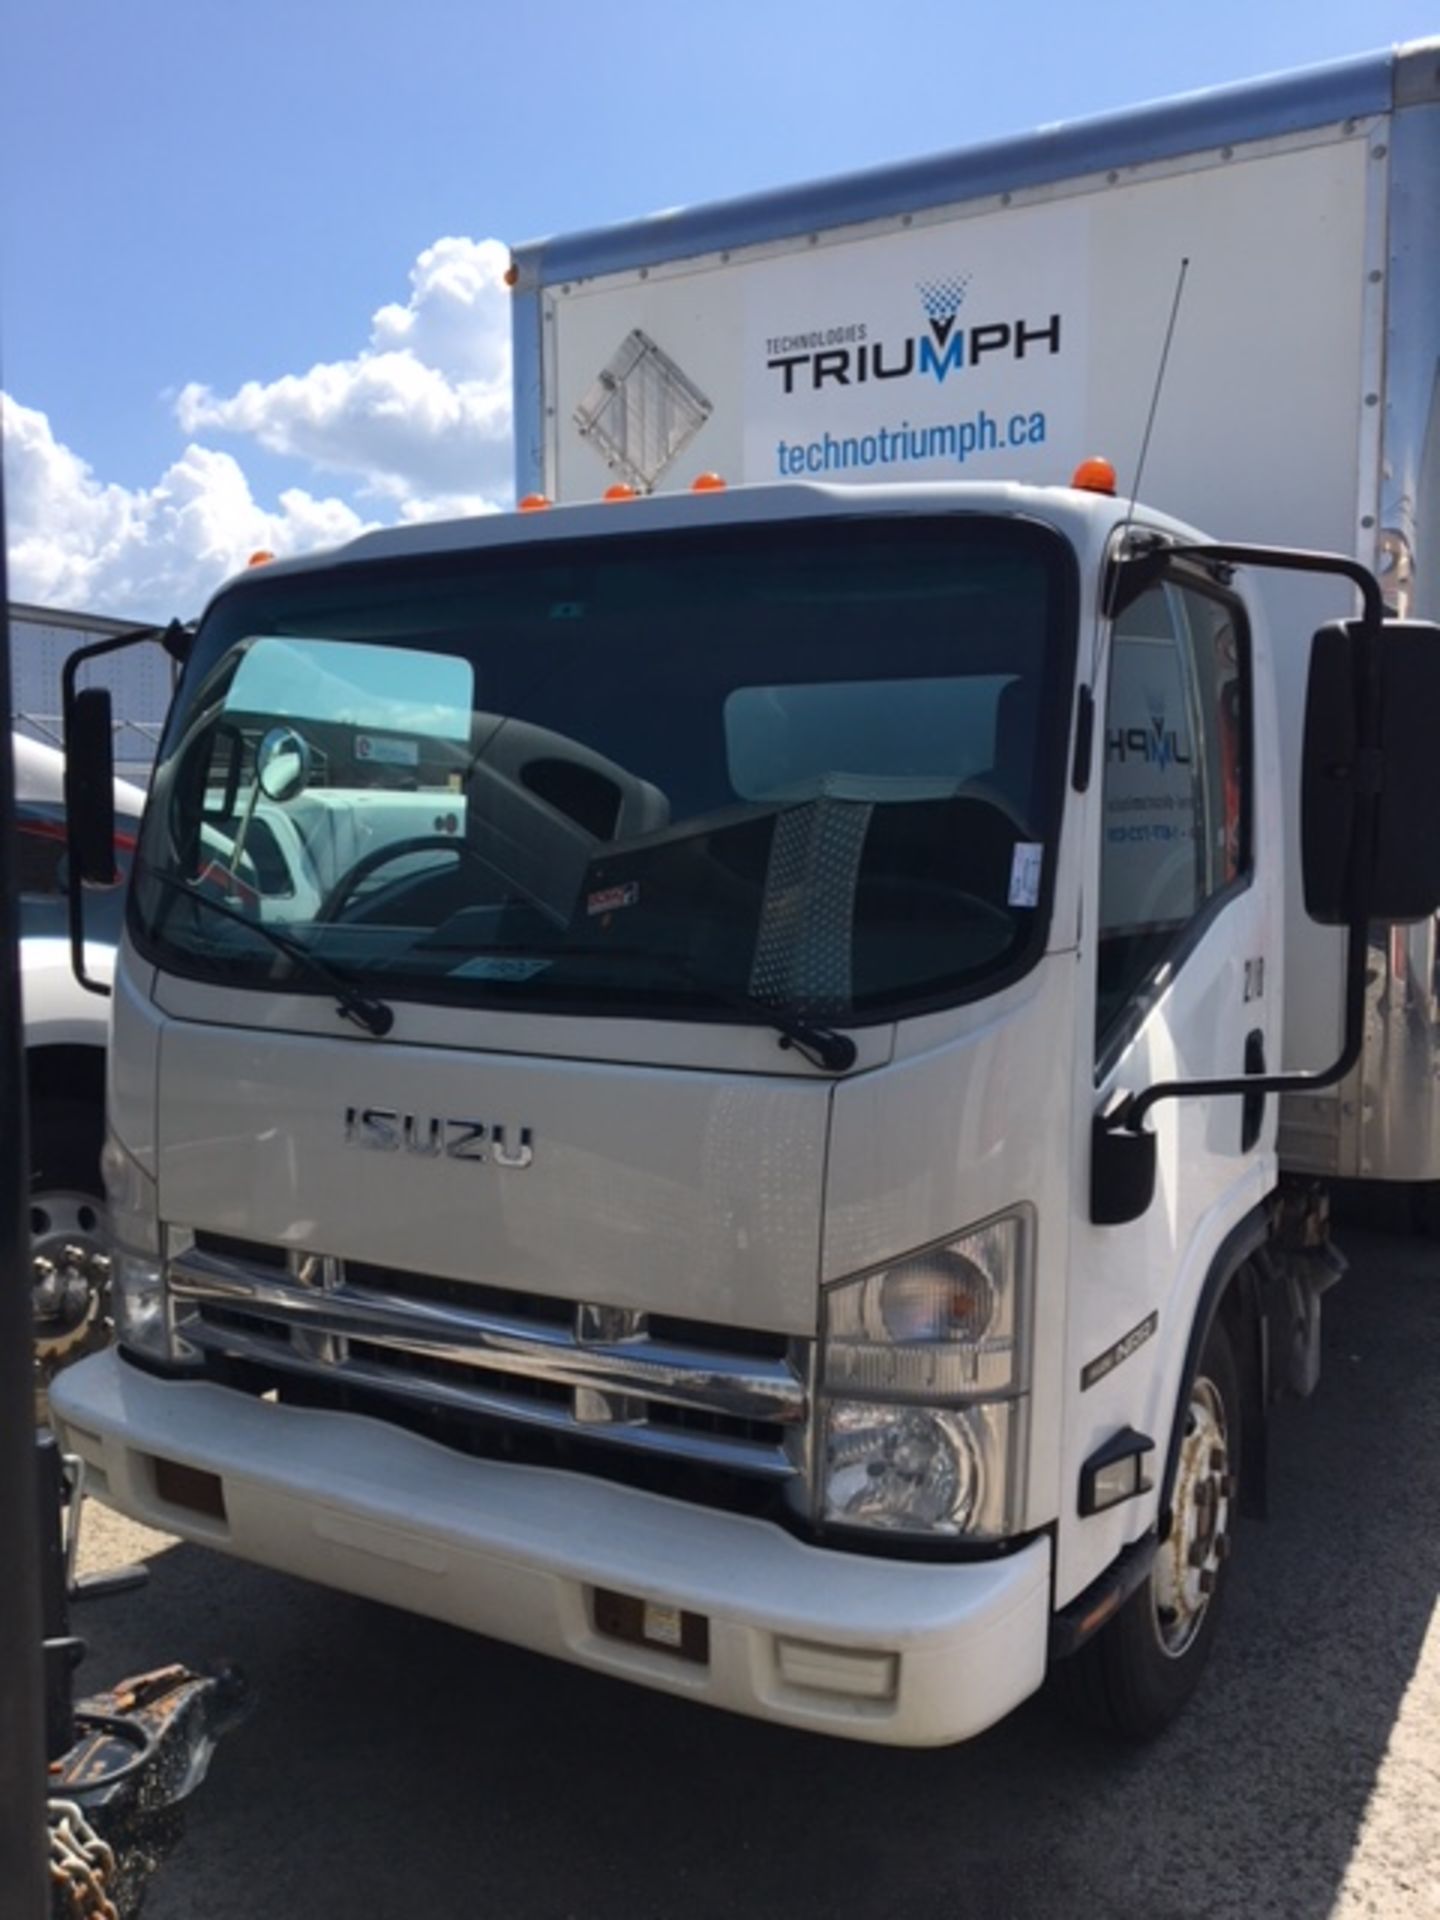 ISUZU Truck, 2013, mod: NRR, 20', Diesel, sn: JALE5W167D7301440 (see photos for details) - Image 2 of 7